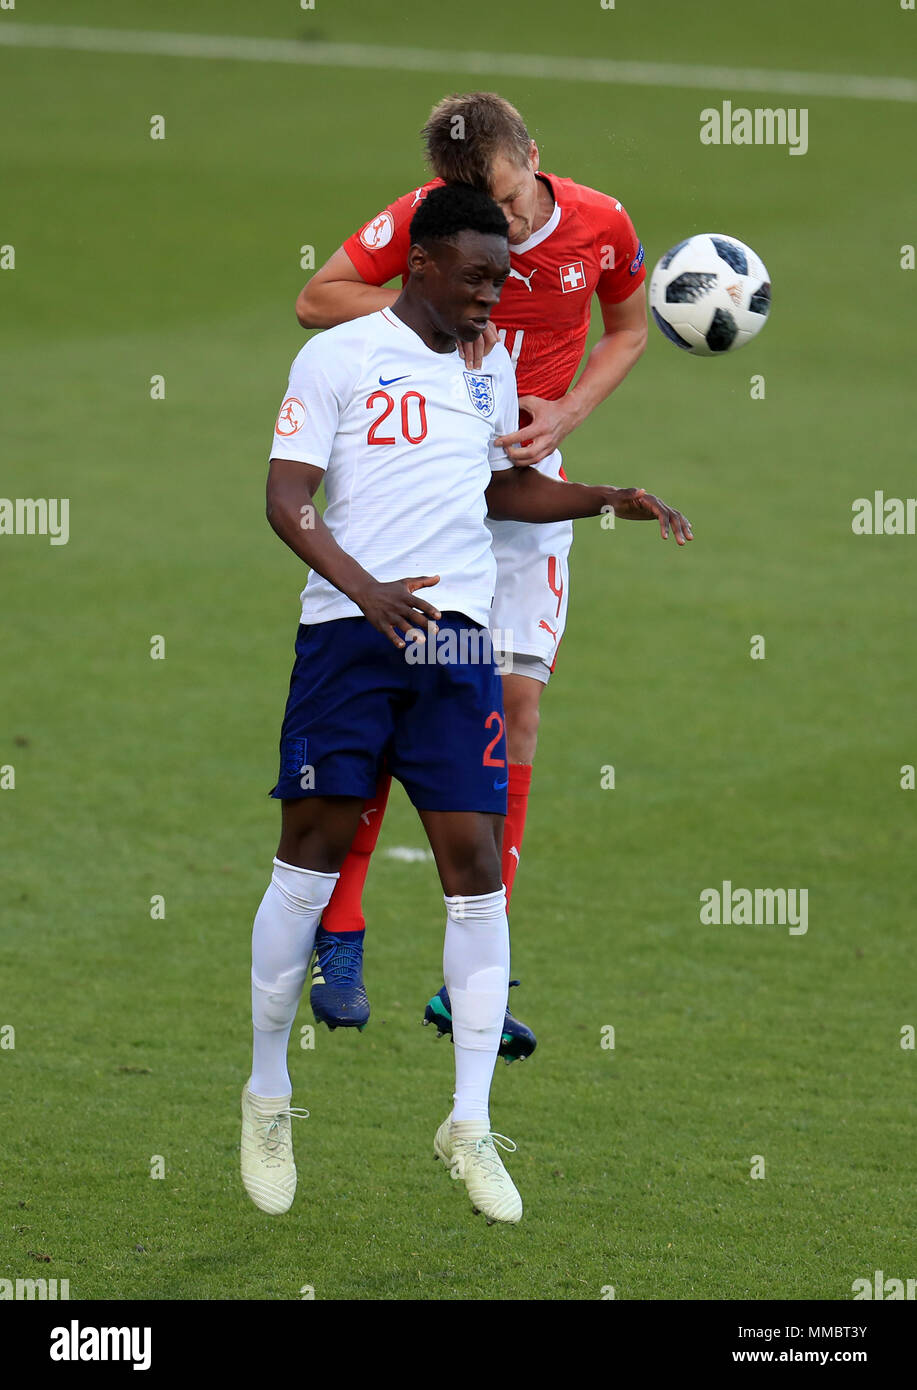 England's Folarin Balogun (left) and Switzerland's Ilan Sauter battle for the ball during the UEFA European U17 Championship, Group A match at the AESSEAL New York Stadium, Rotherham. Stock Photo